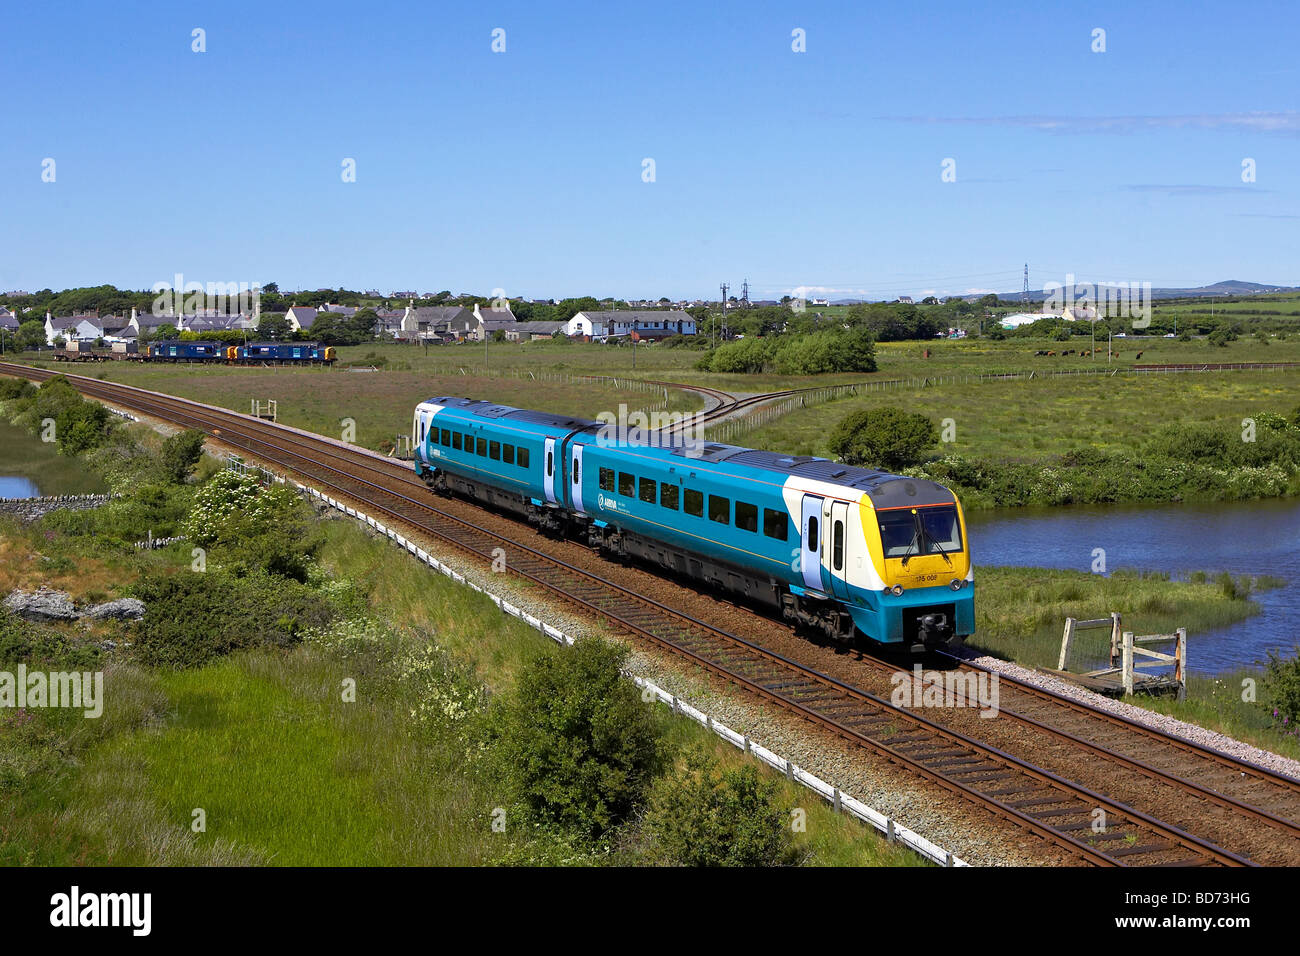 175 008 Arriva Trains Wales passe vallée sur Anglesey Banque D'Images